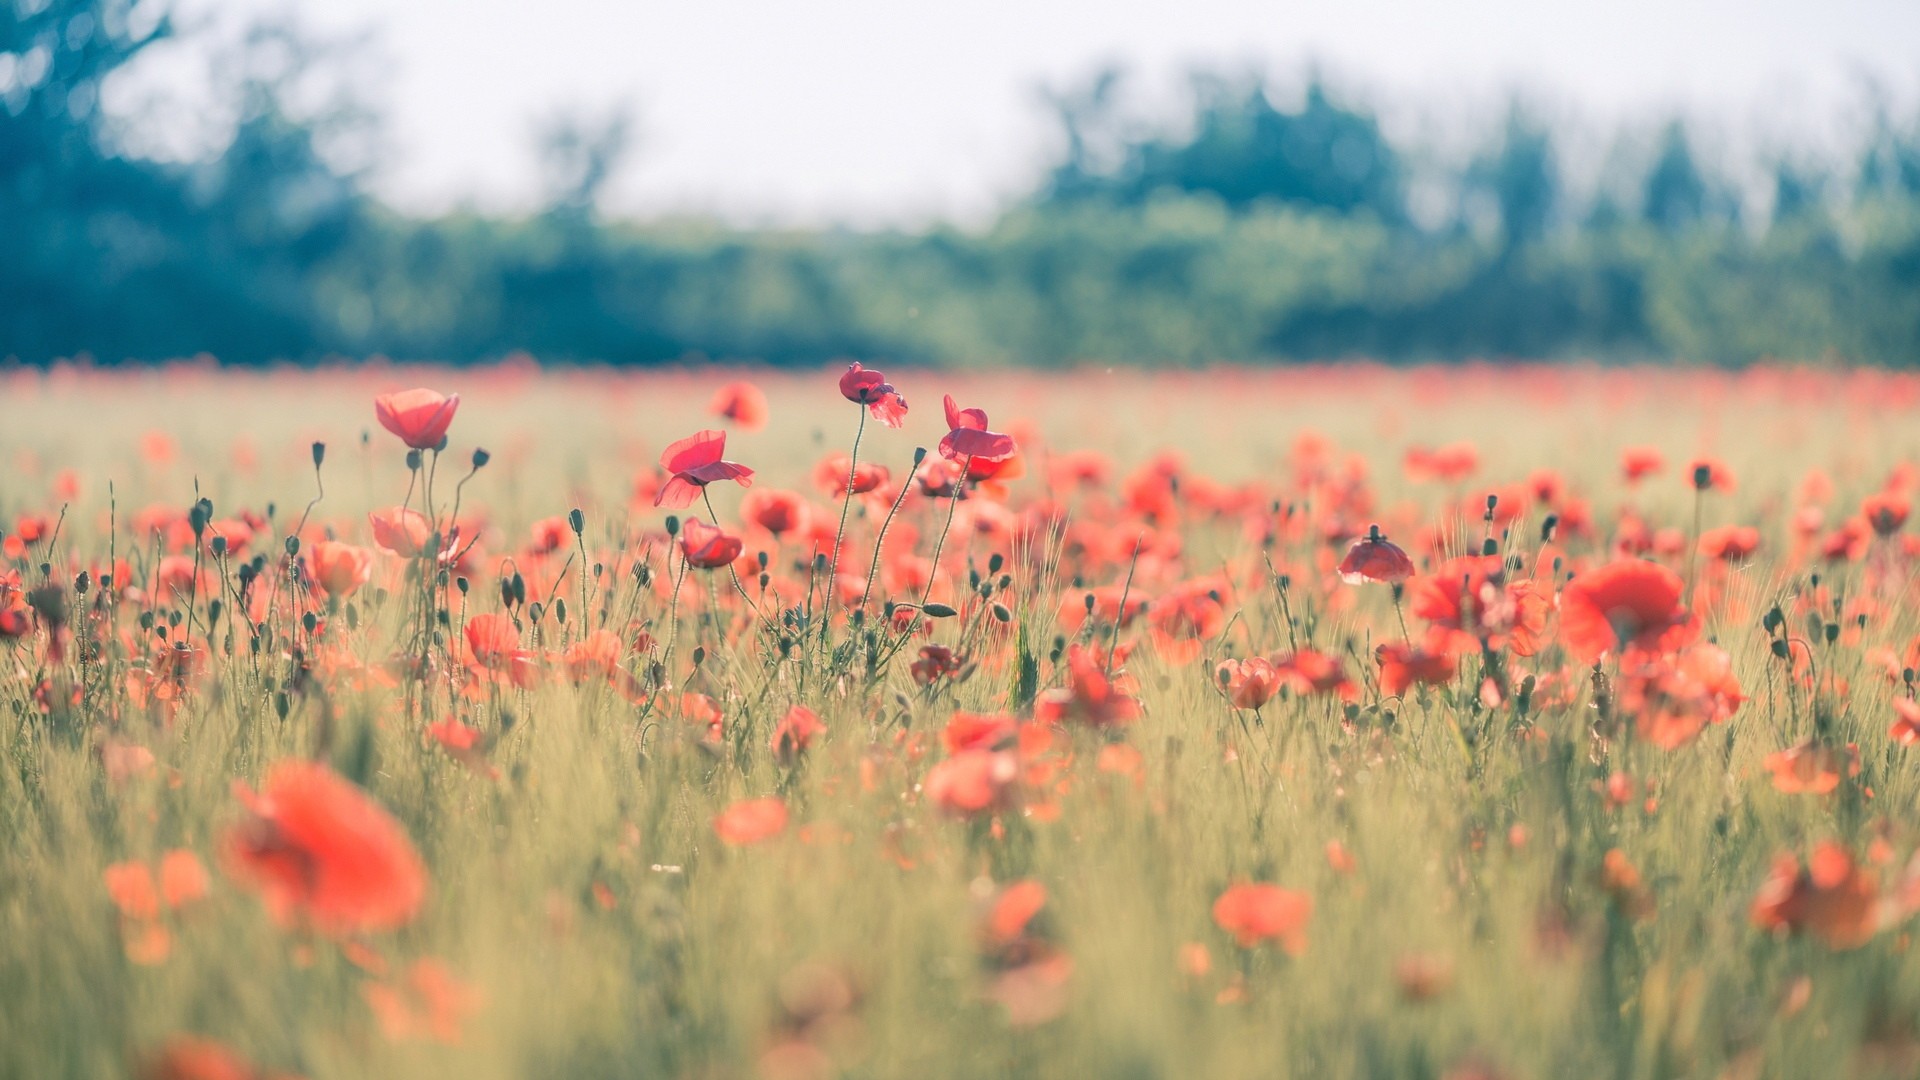 General 1920x1080 poppies nature field flowers red flowers plants outdoors